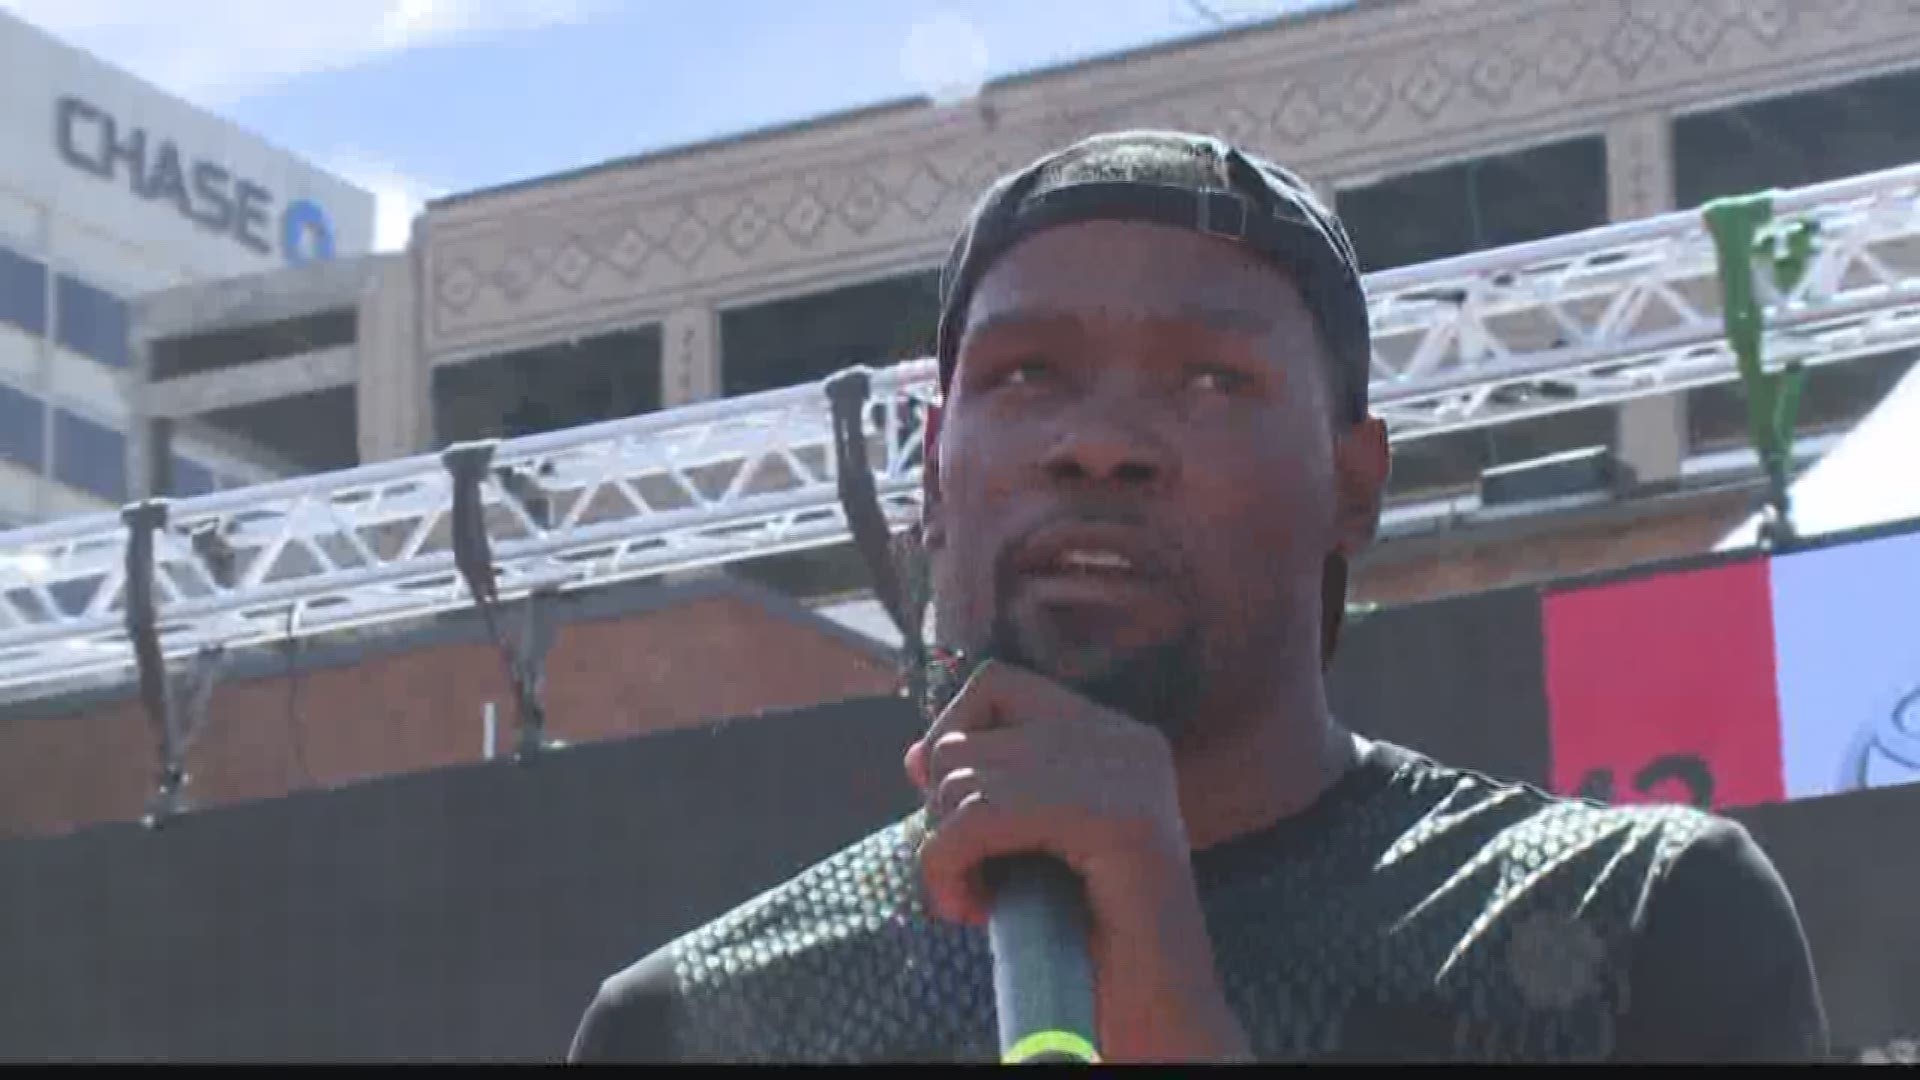 Kevin Durant, fresh off a NBA championship and MVP award, surprised the city of Spokane by making an appearance at Hoopfest.